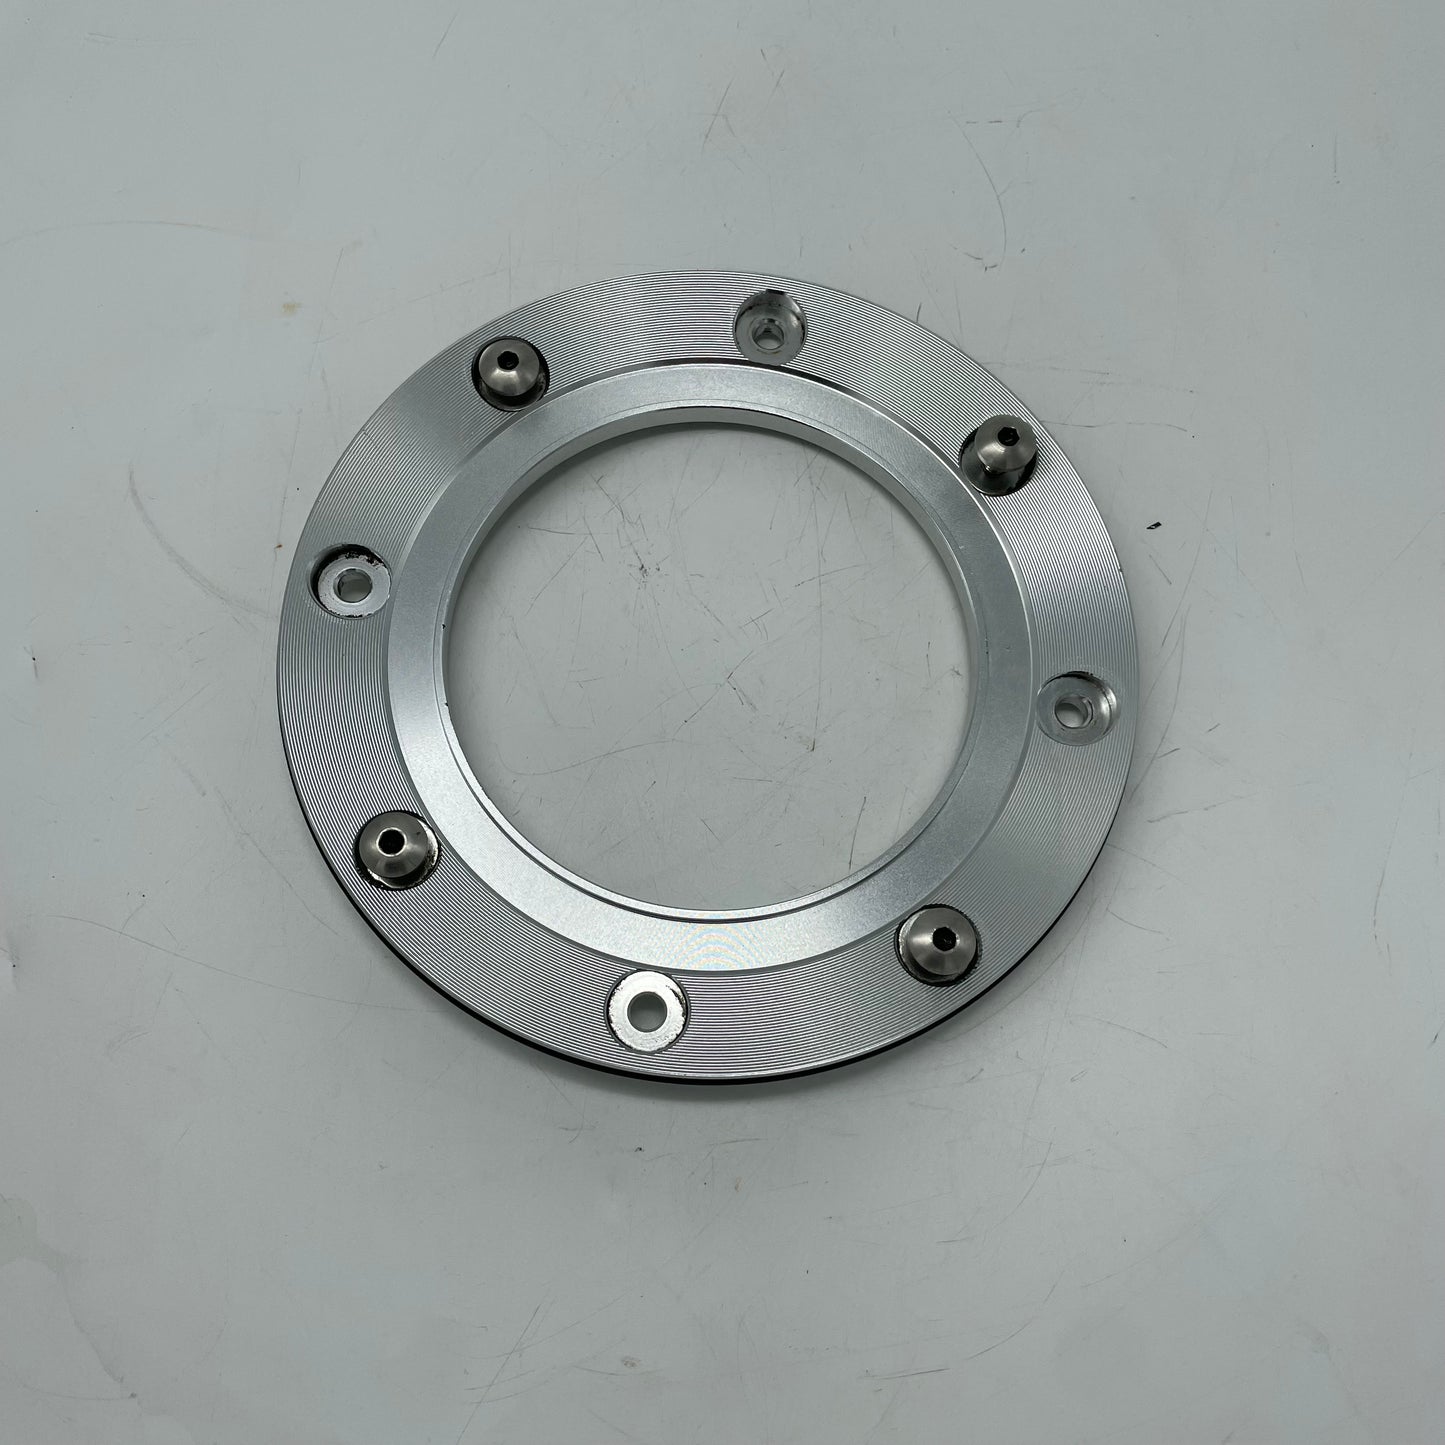 Griso Gas Cap Ring Used